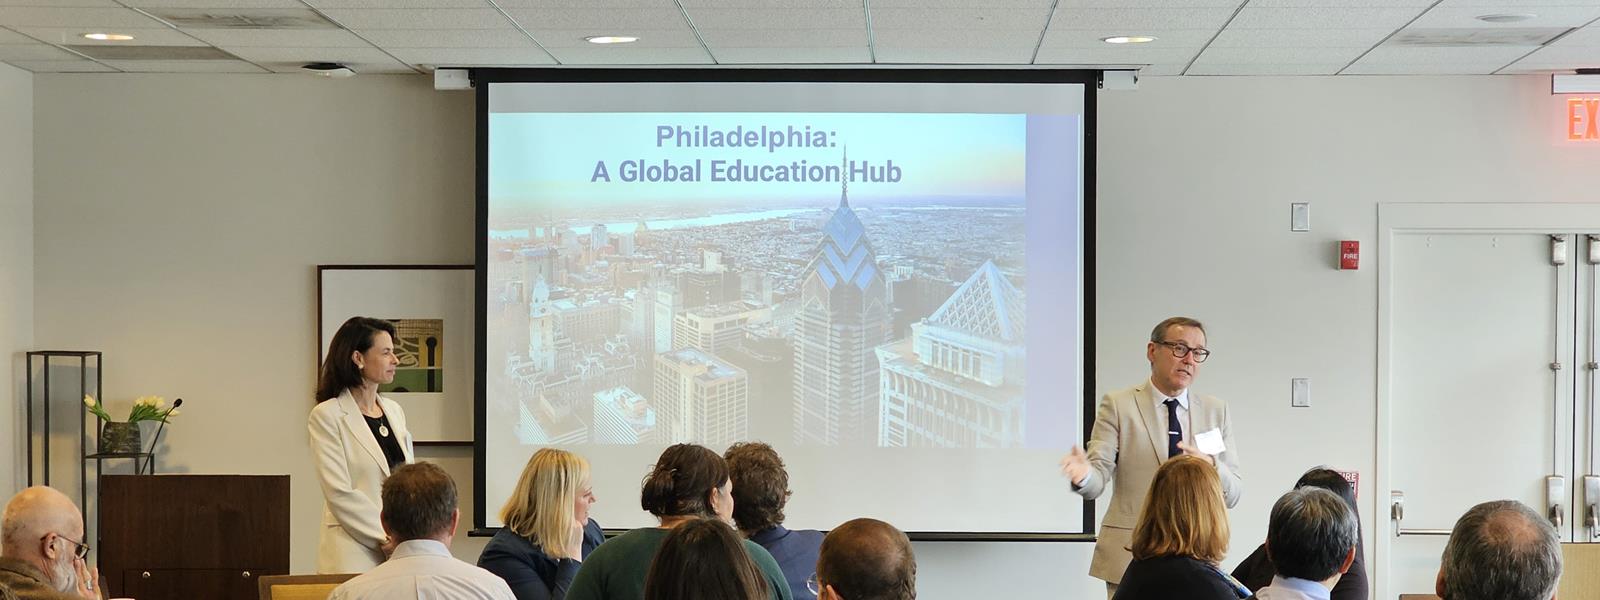 The meeting was led by Drexel University’s Vice Provost of Global Engagement Rogelio Mi&#241;ana, PhD, photographed standing on right at the event, and Vice Provost of Global Engagement at Temple University Emilia Zankina, PhD, standing on left.